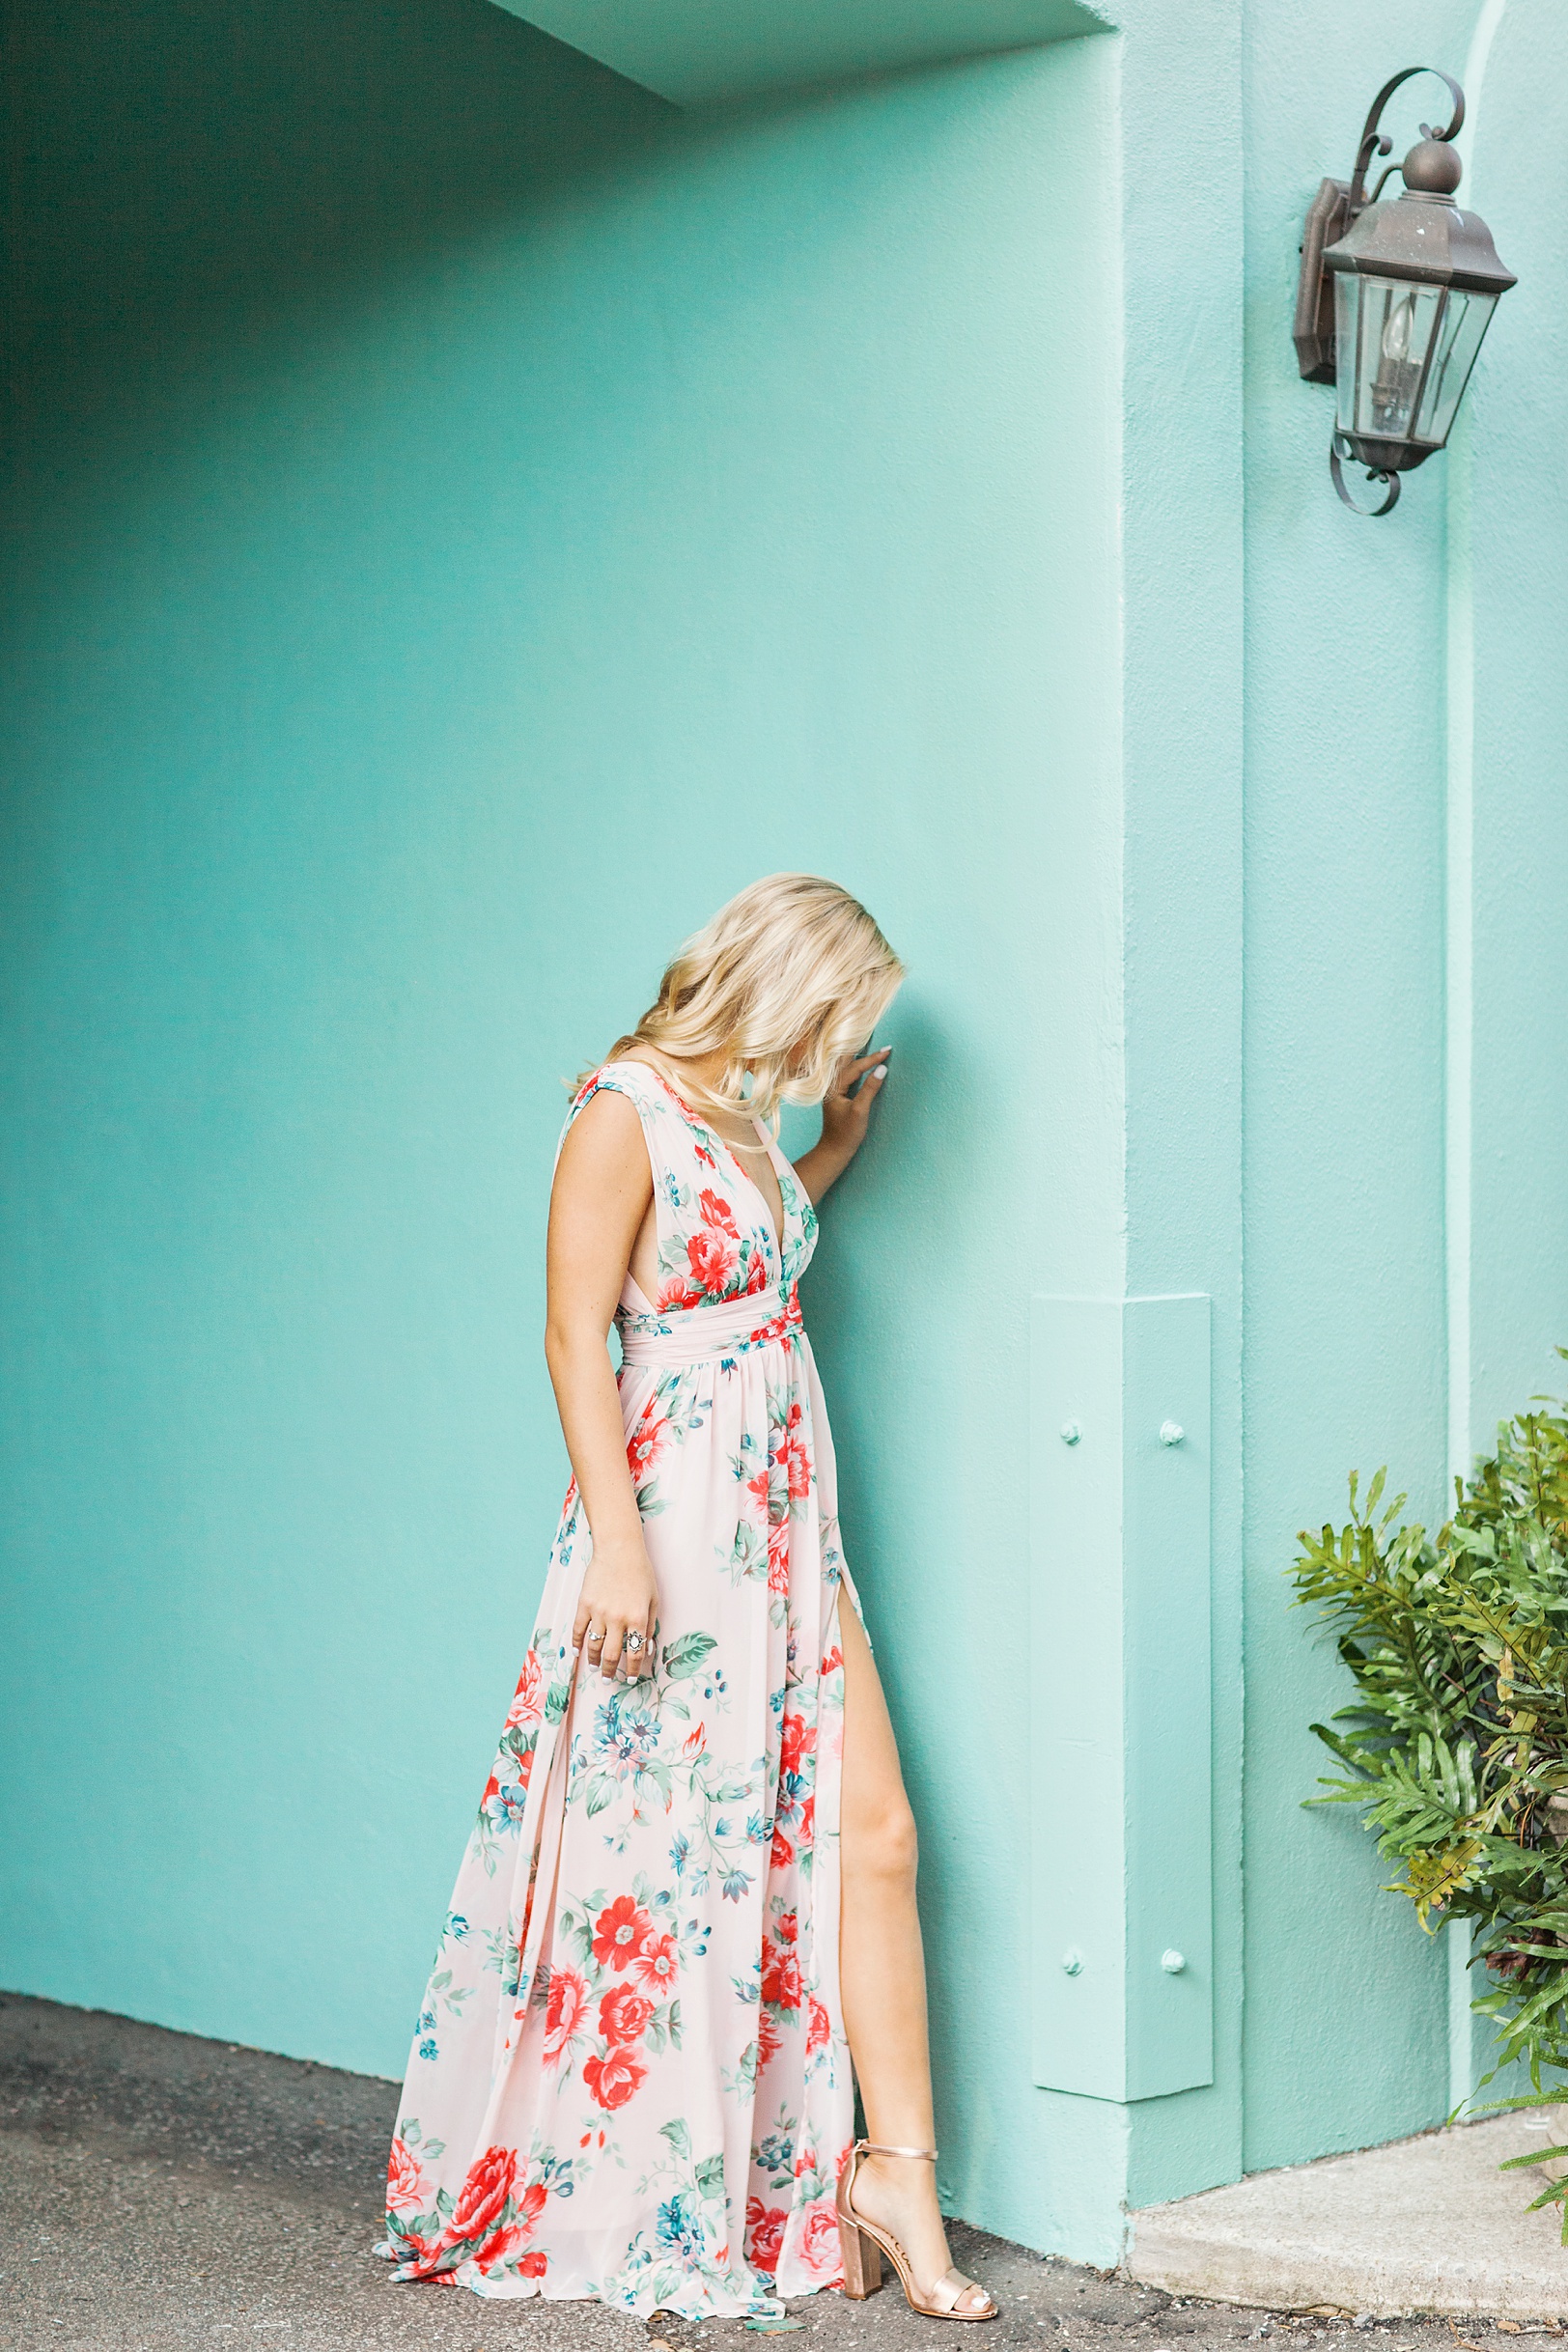 Charleston Turquoise Historic Home | Senior Pictures by Kaitlin Scott